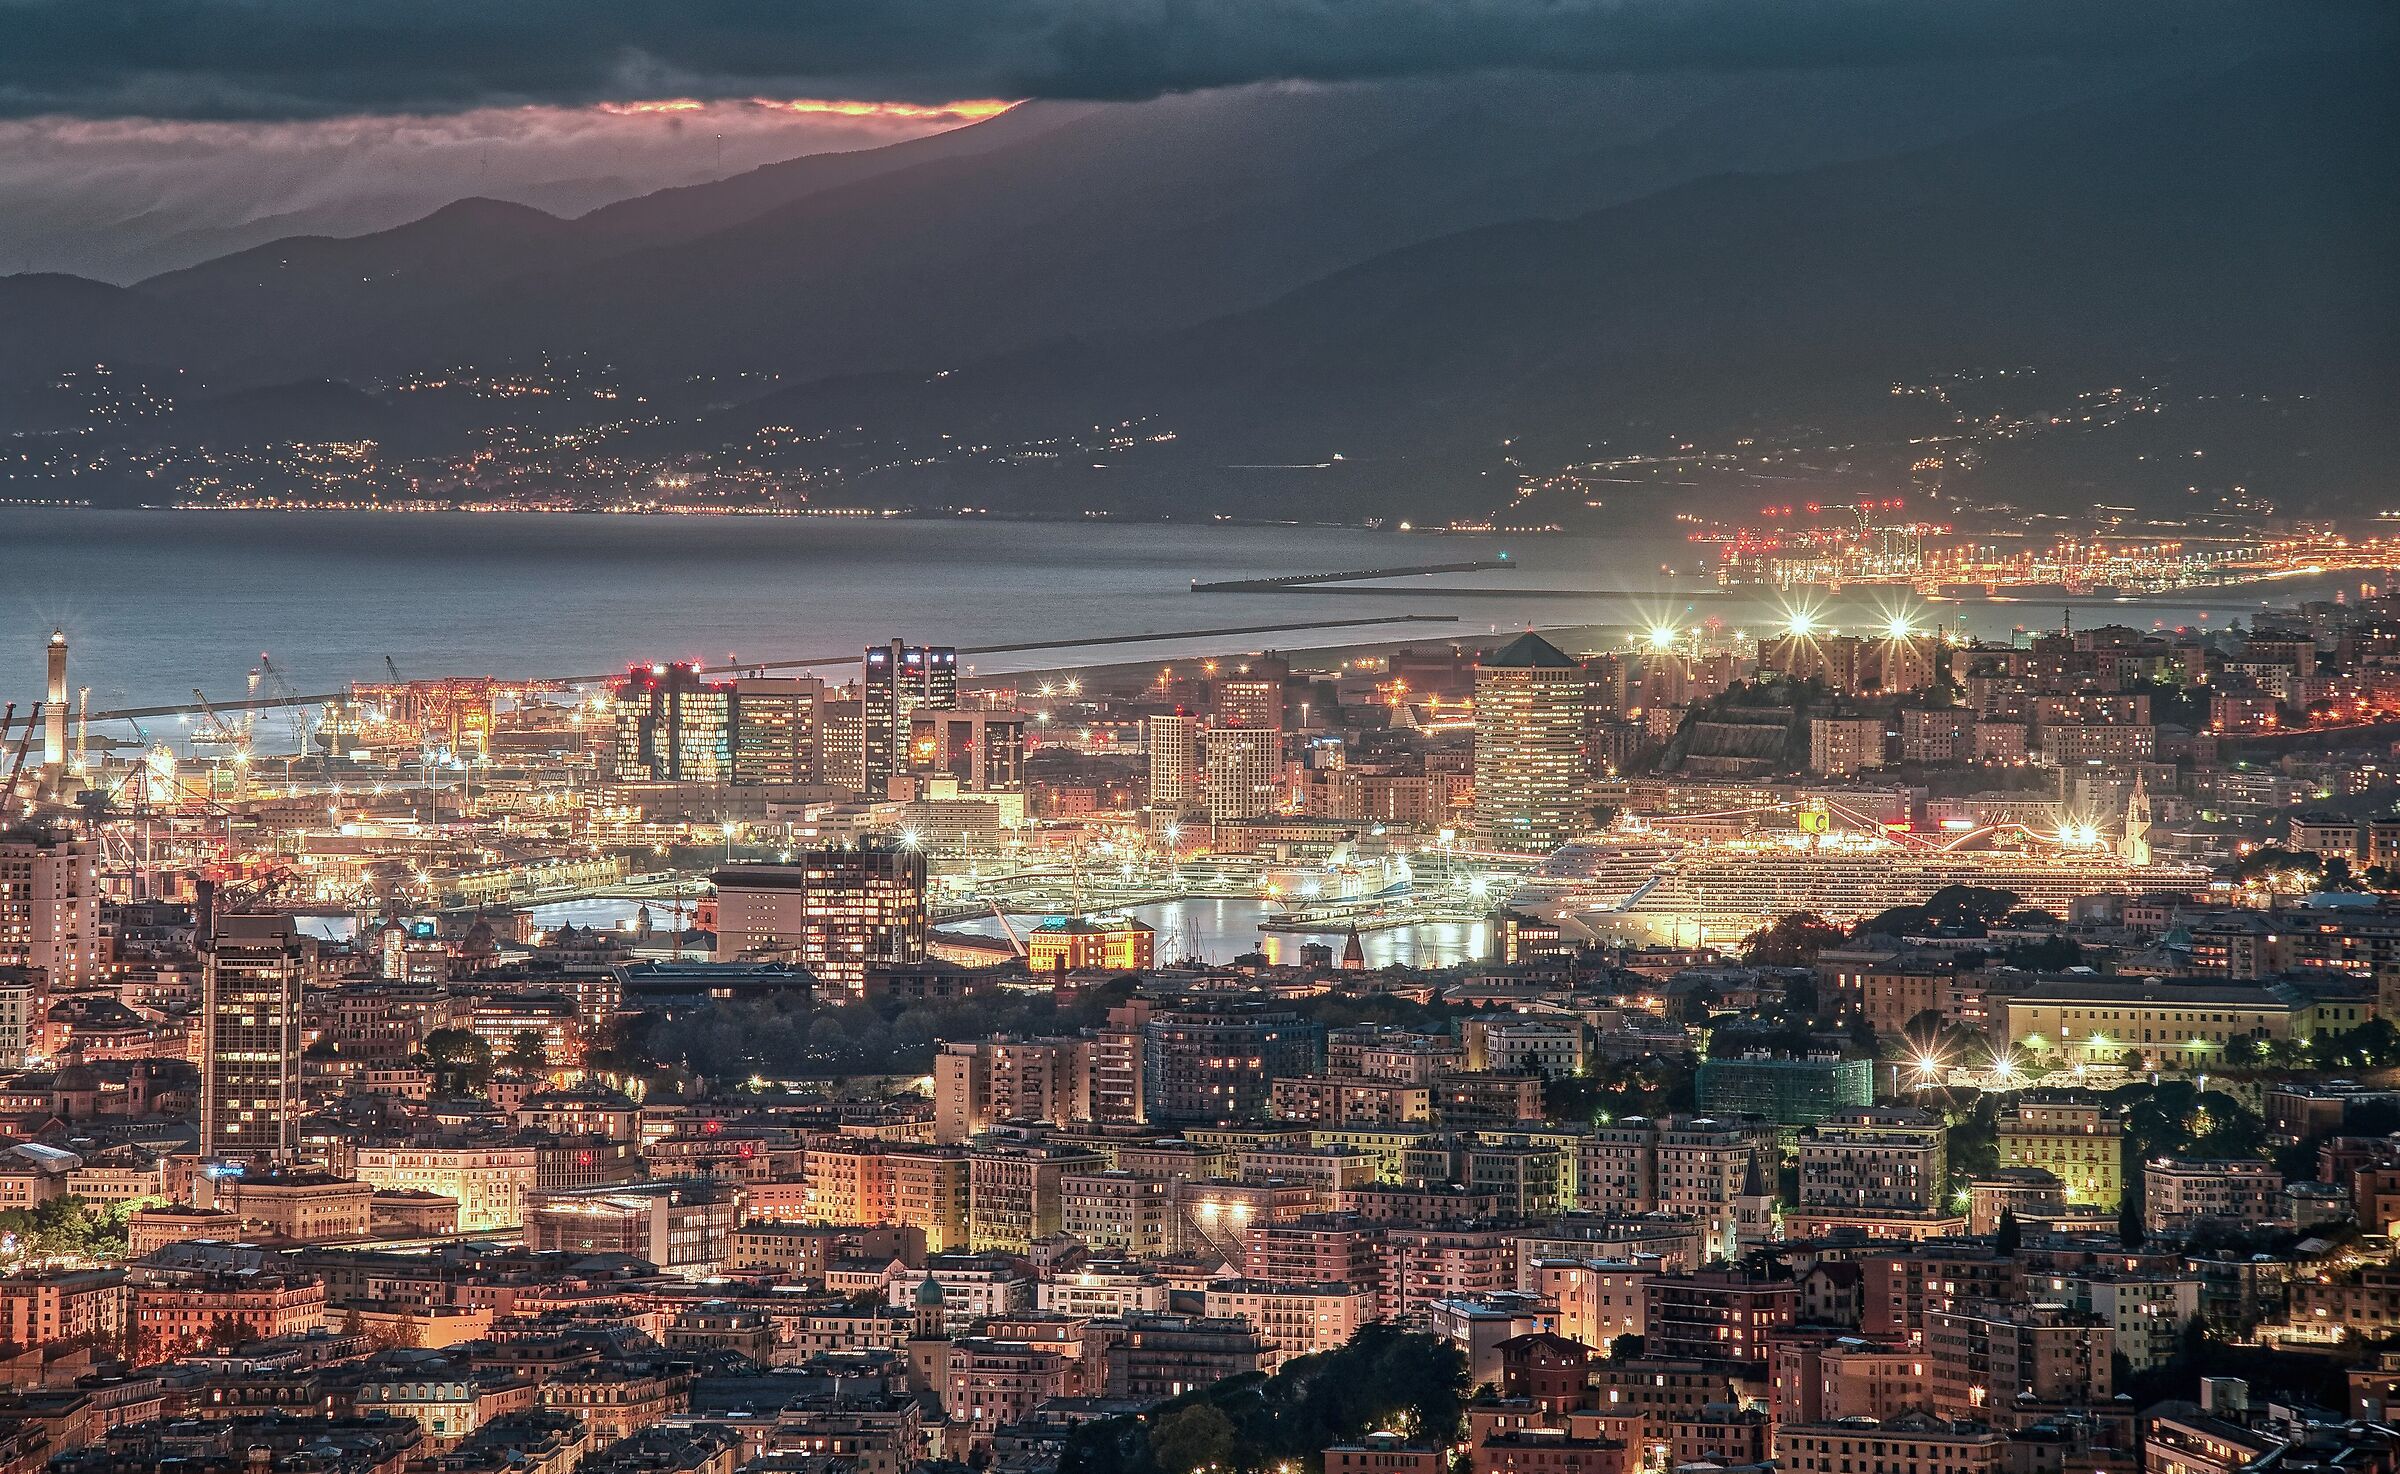 One evening in November, looking at Genoa from above.......